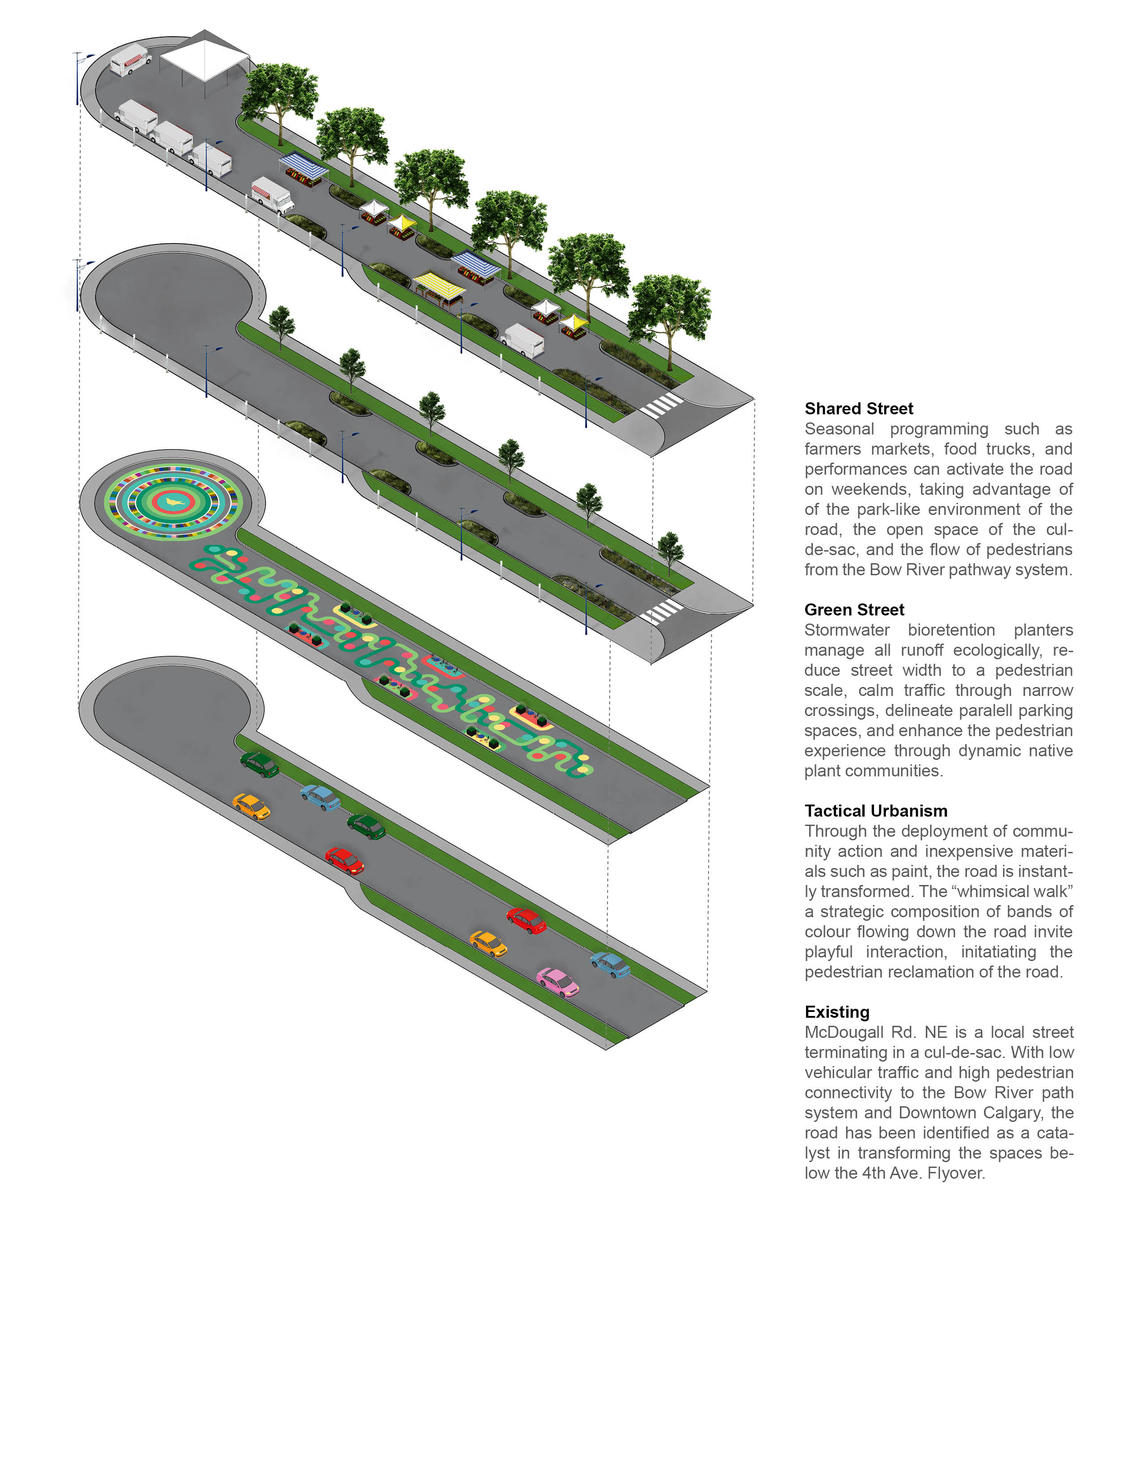 The projected evolution of McDougall Road N.E. from vehicular corridor to shared street.